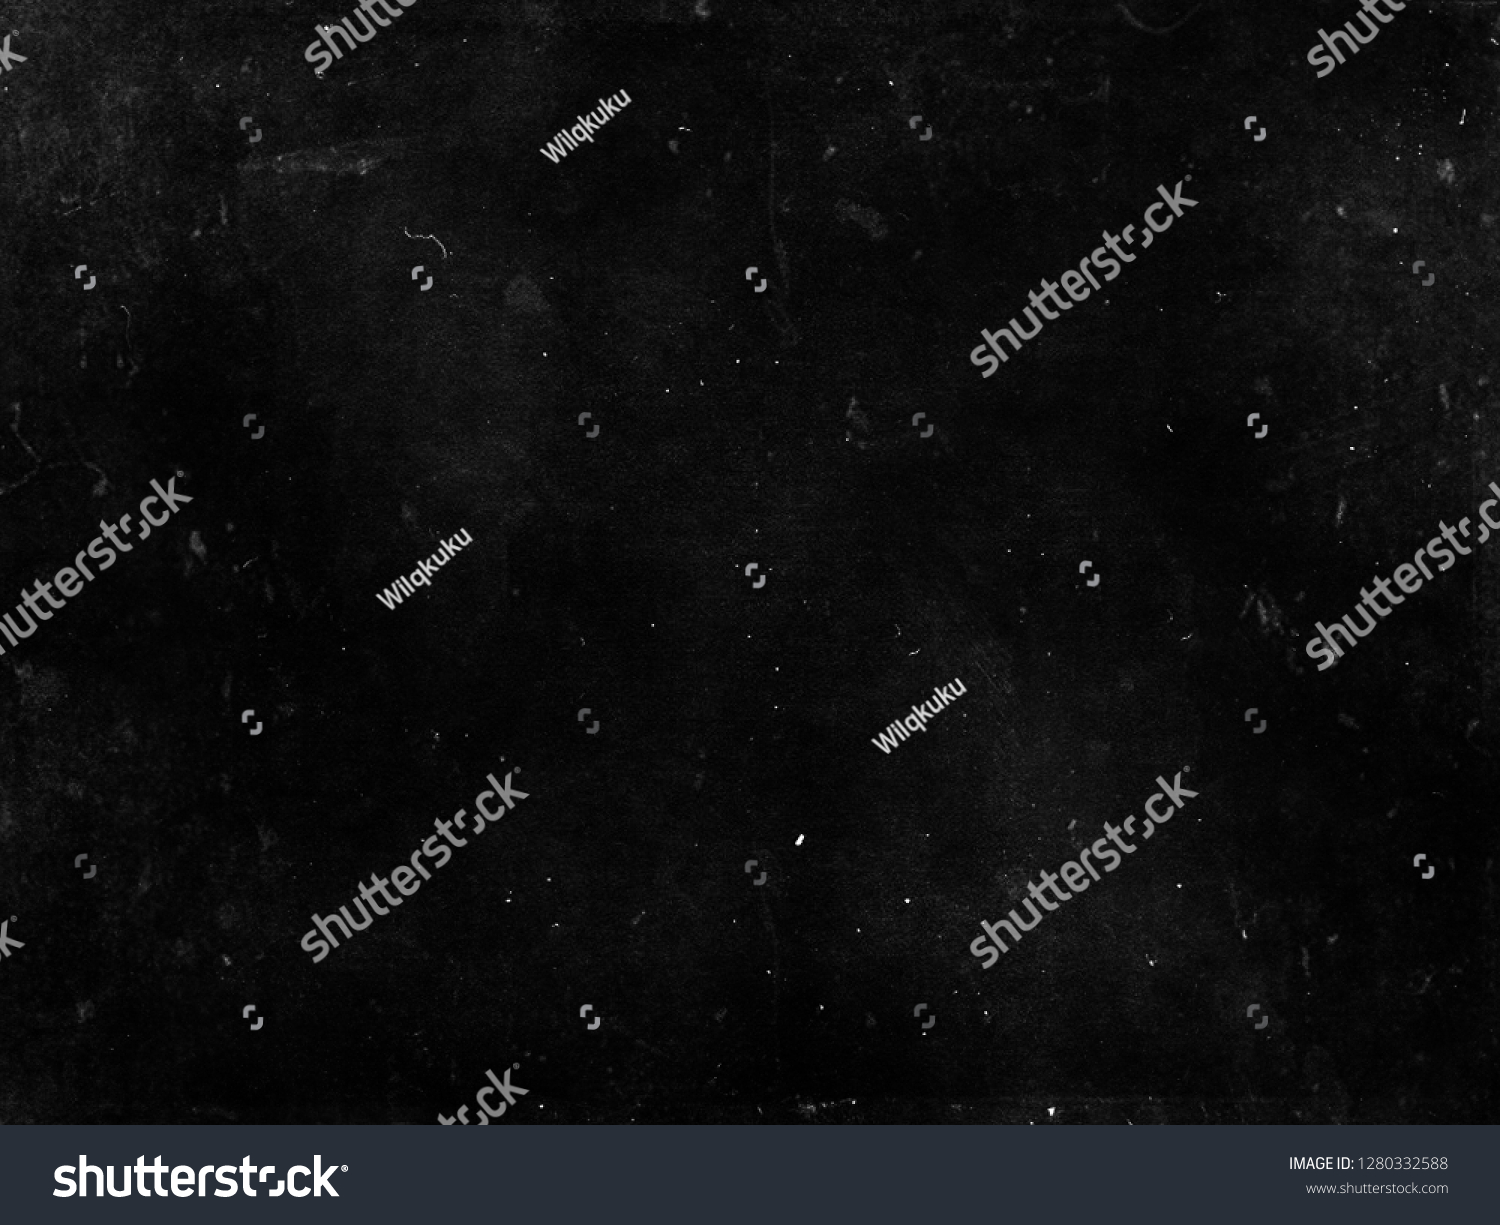 Grunge black scratched background, old film effect, distressed scary texture  #1280332588